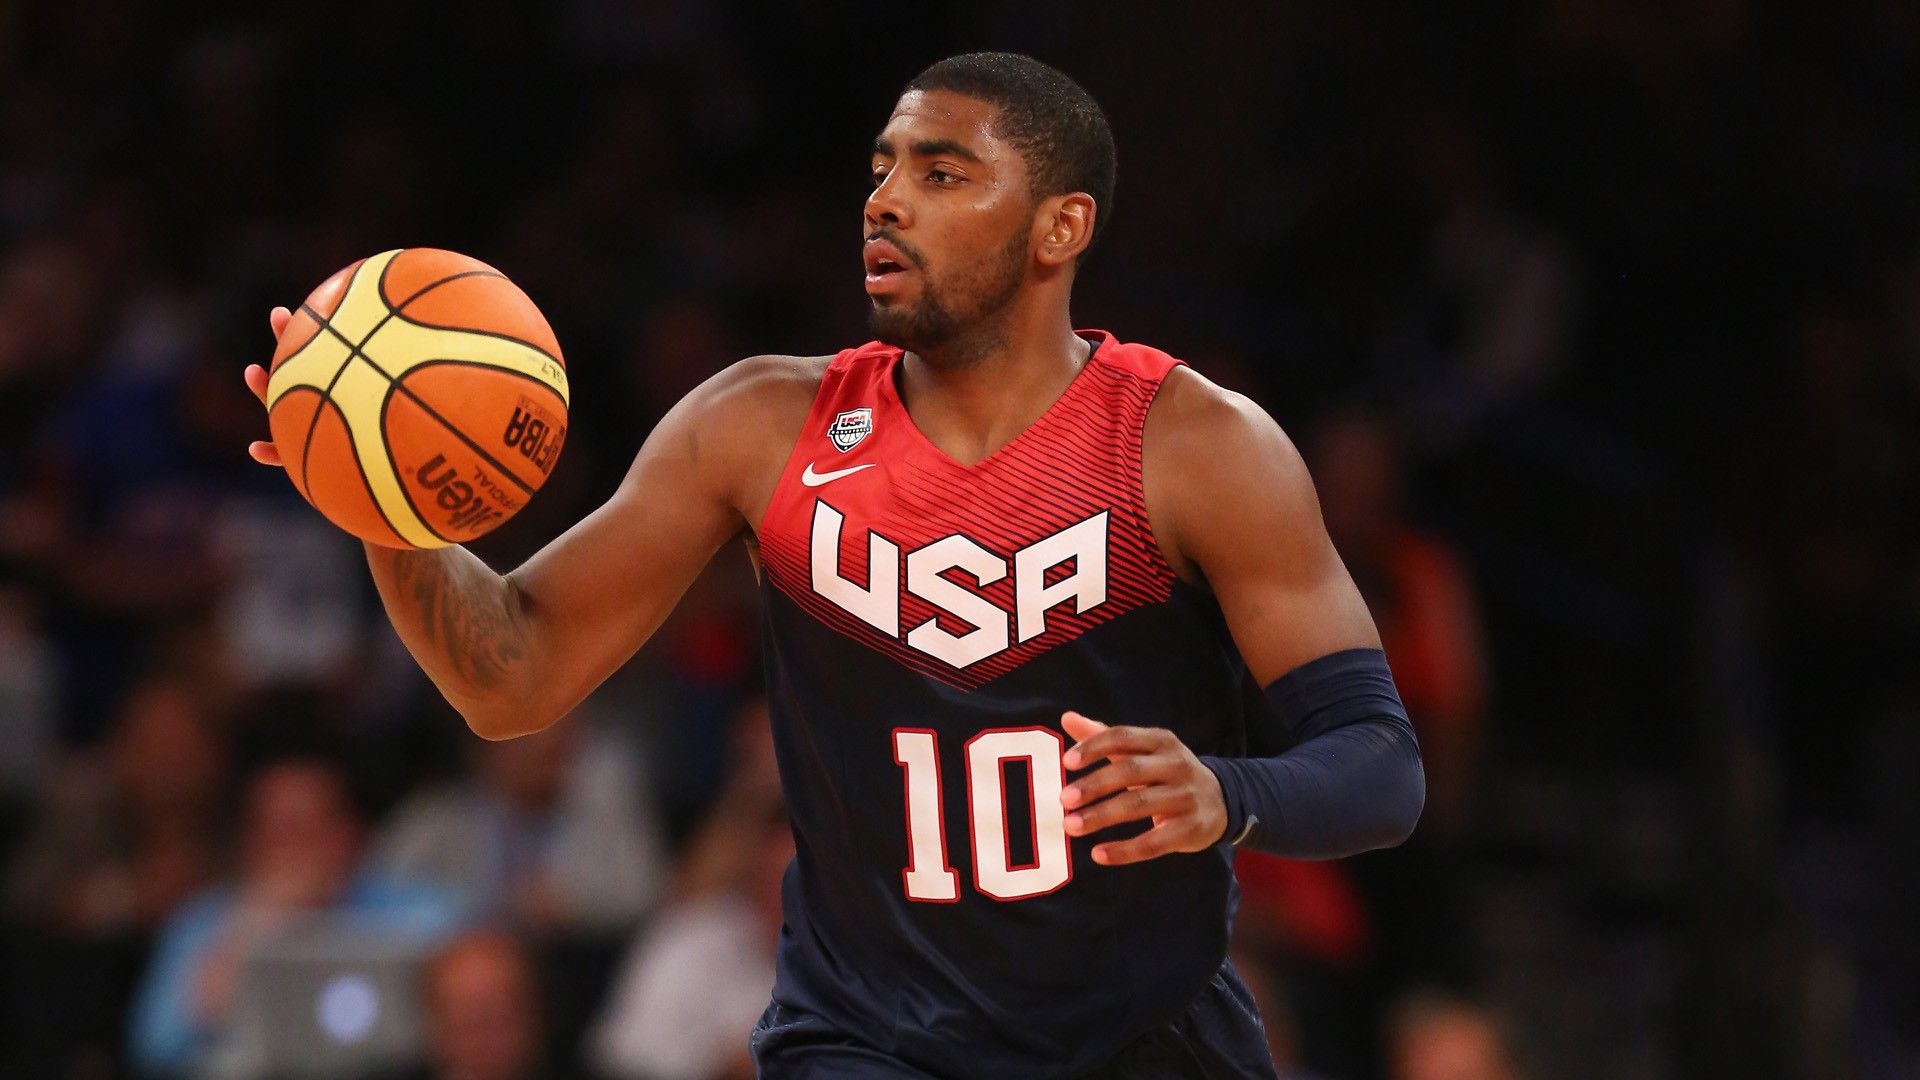 Kyrie Irving Wallpaper Free download